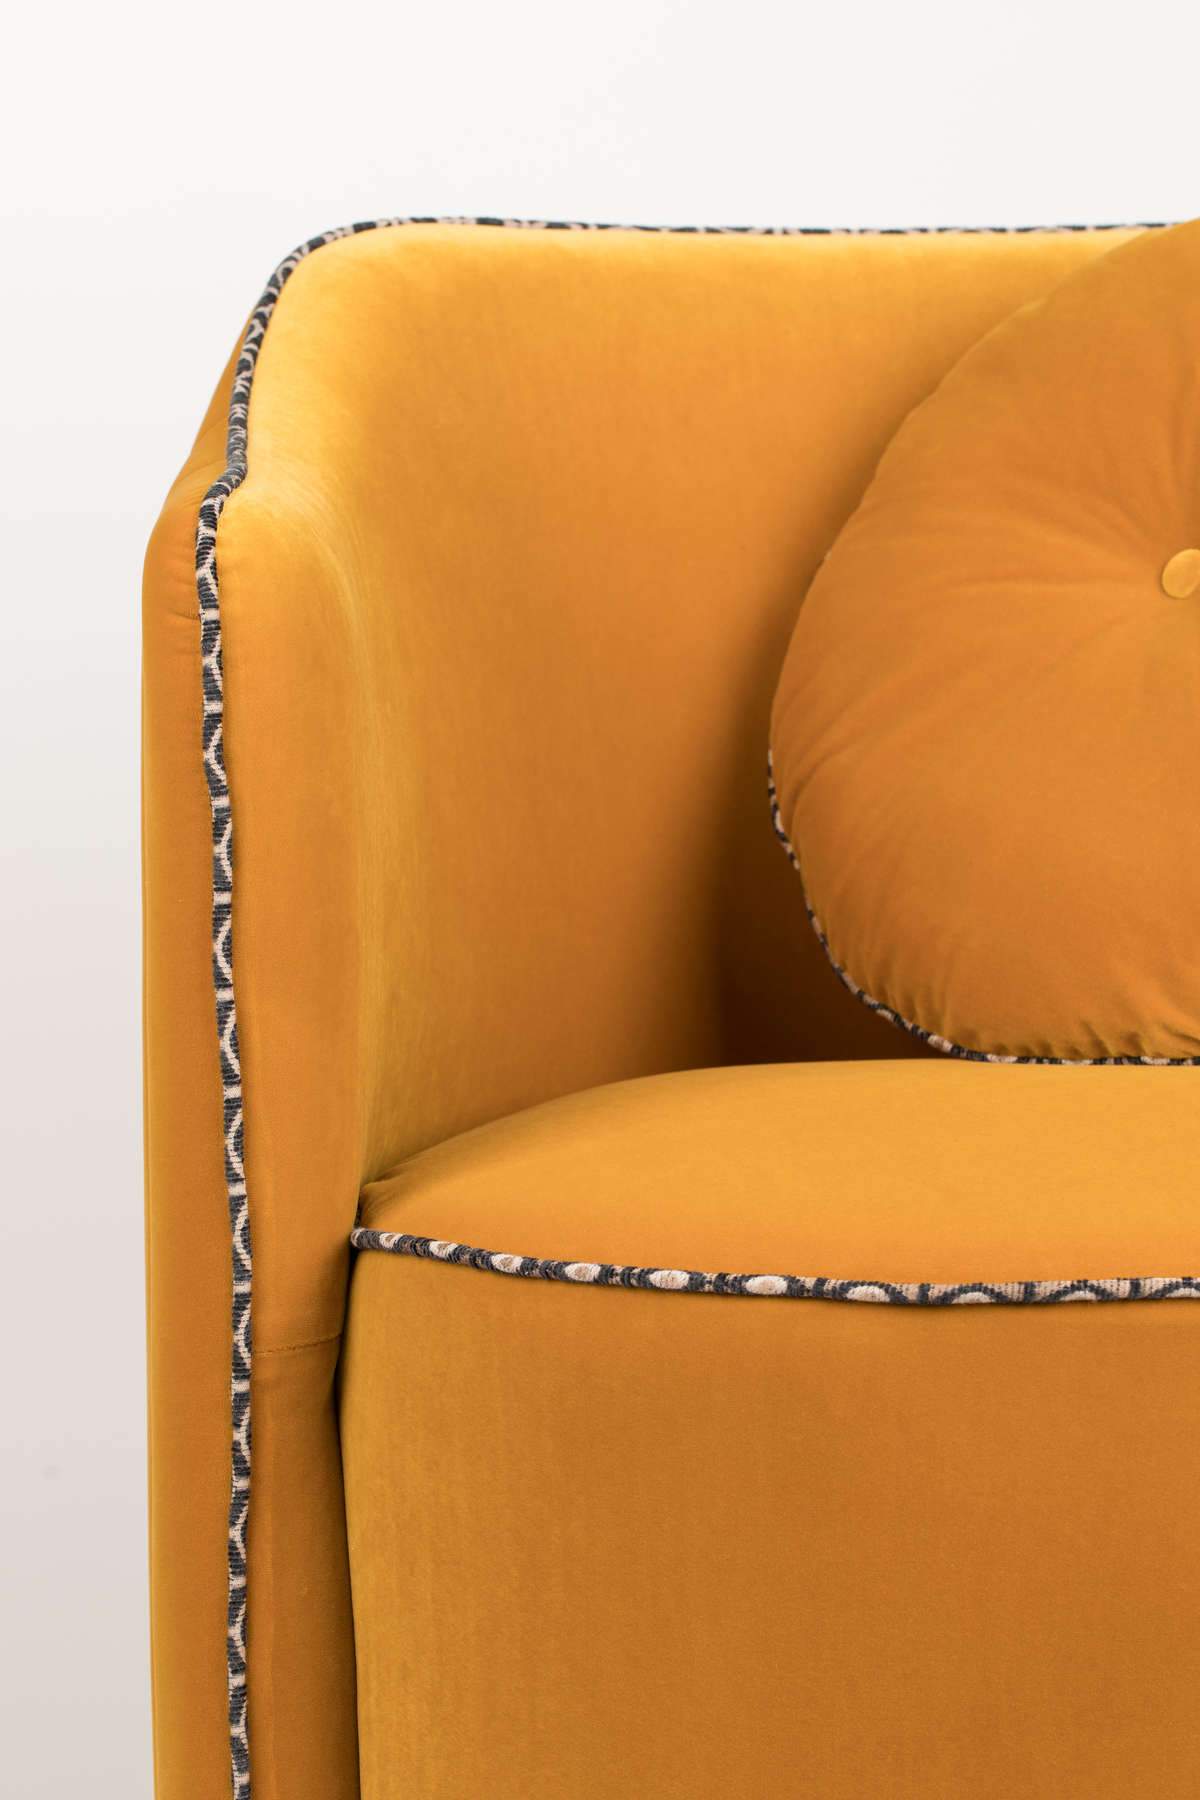 This velvet armchair for the living room exudes the atmosphere of the Parisian Buduar in the retro style. But this is not only style and content, because the Bold Monkey Sassy Granny chair is also a functional element of decor. The armchair itself is mounted on a rotating base and equipped with a removable pillow - both of these things provide an additional layer of comfort.